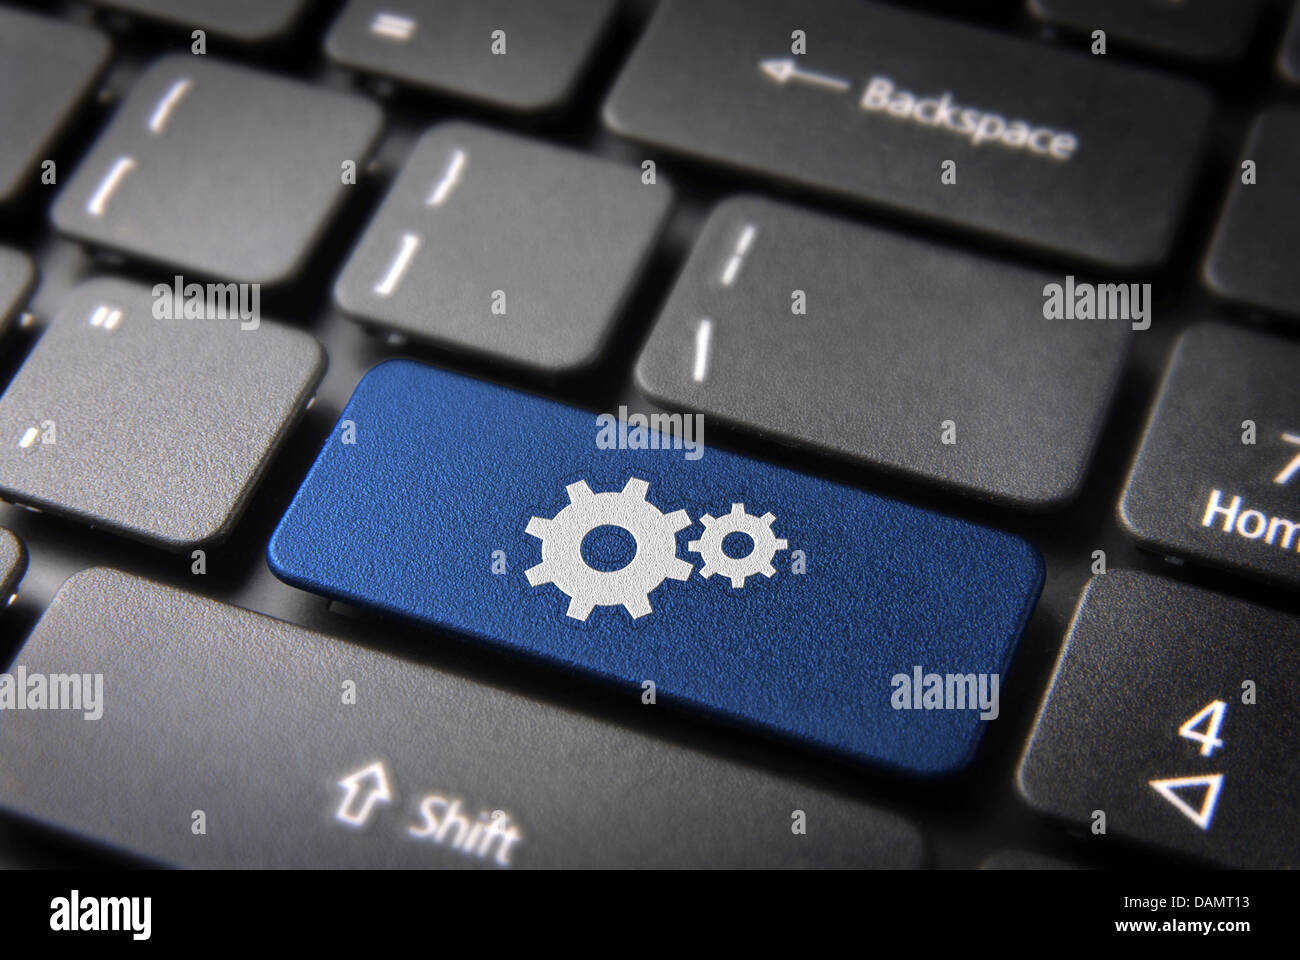 Industrial key with Gear wheel icon on laptop keyboard. Included clipping path, so you can easily edit it. Stock Photo